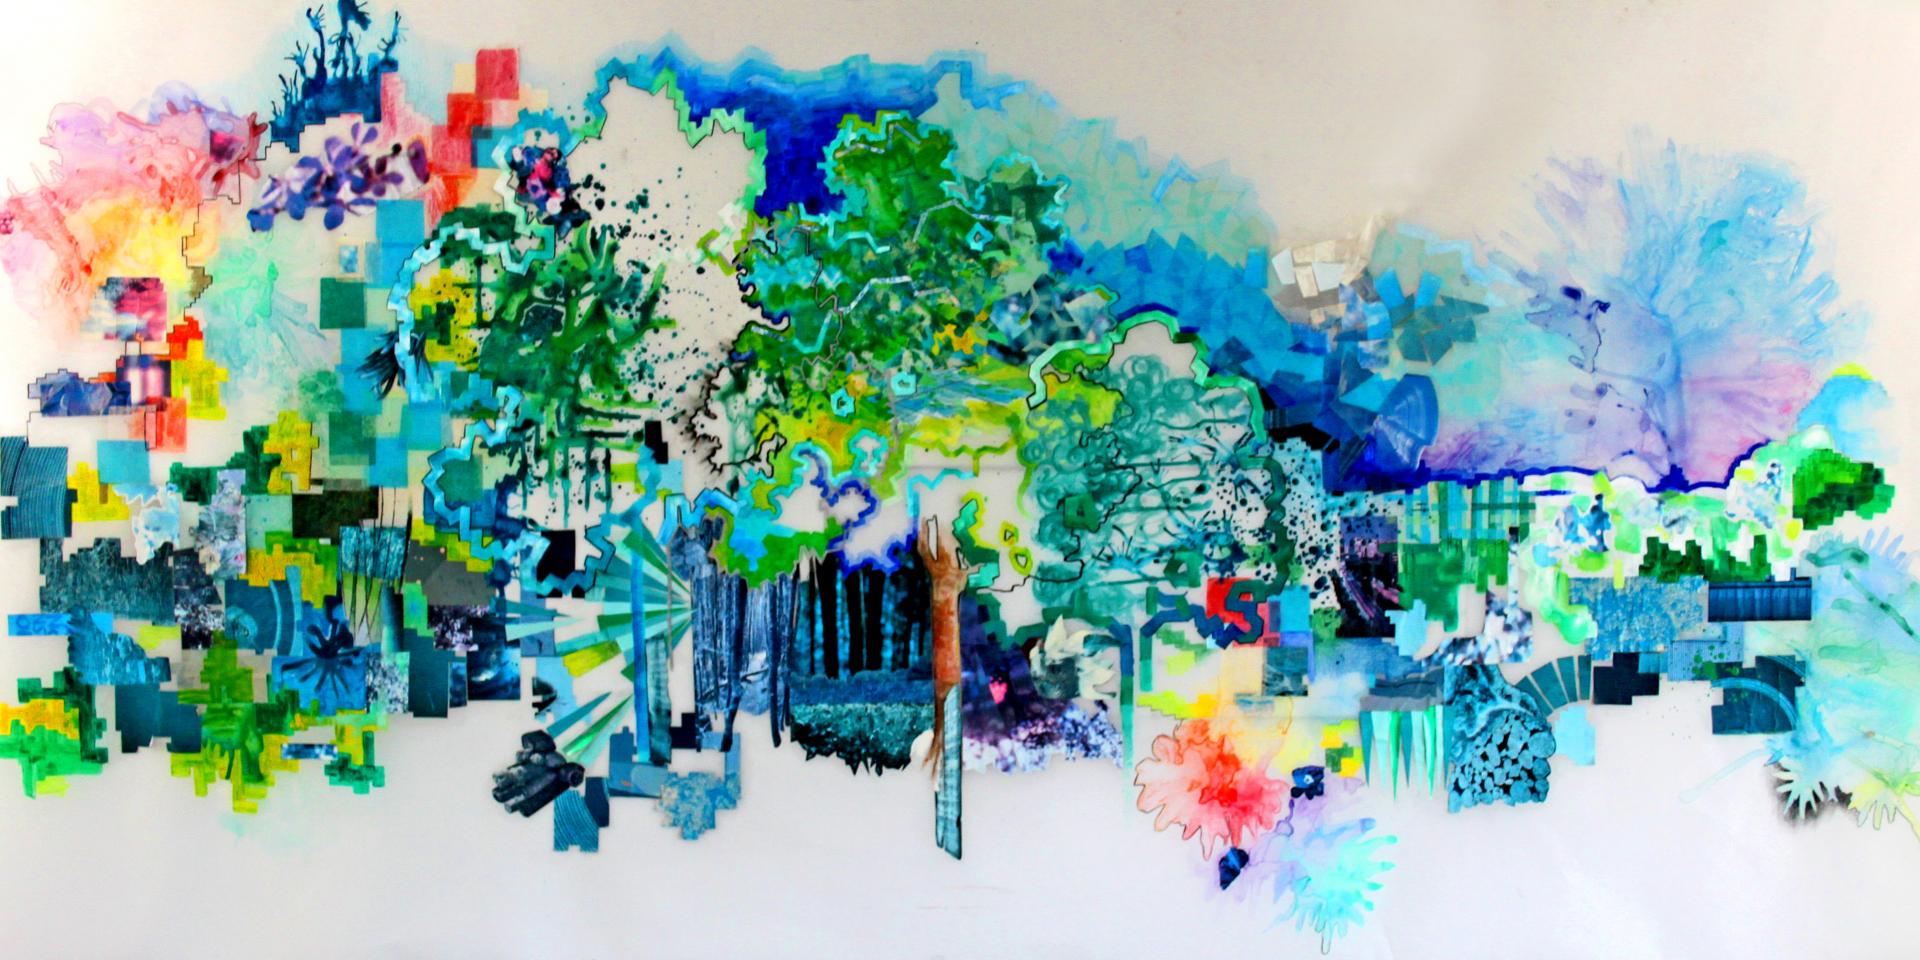 East Toronto portrayed through oil and coloured paints in a landscape canvas, artwork by Christine Walker